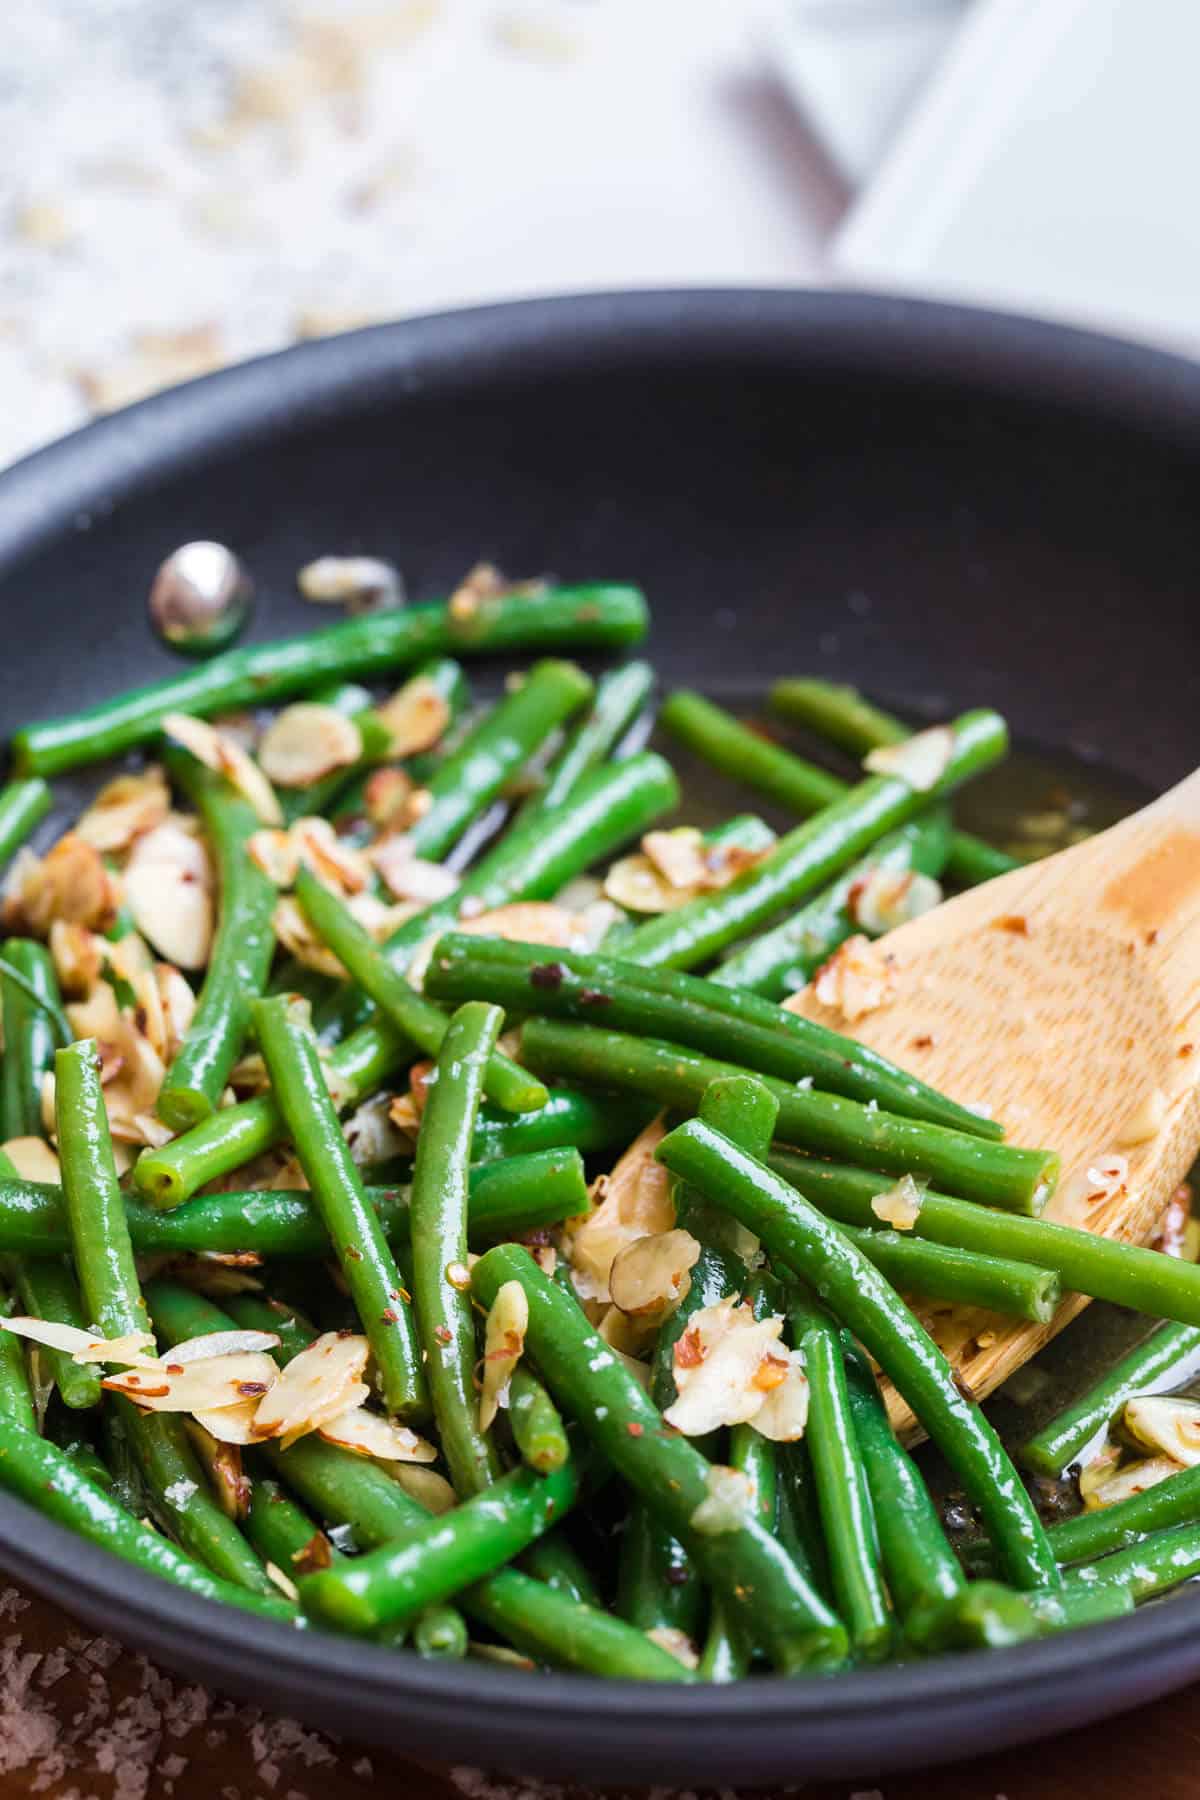 Chili Buttered green beans in a skillet with a wooden spoon.